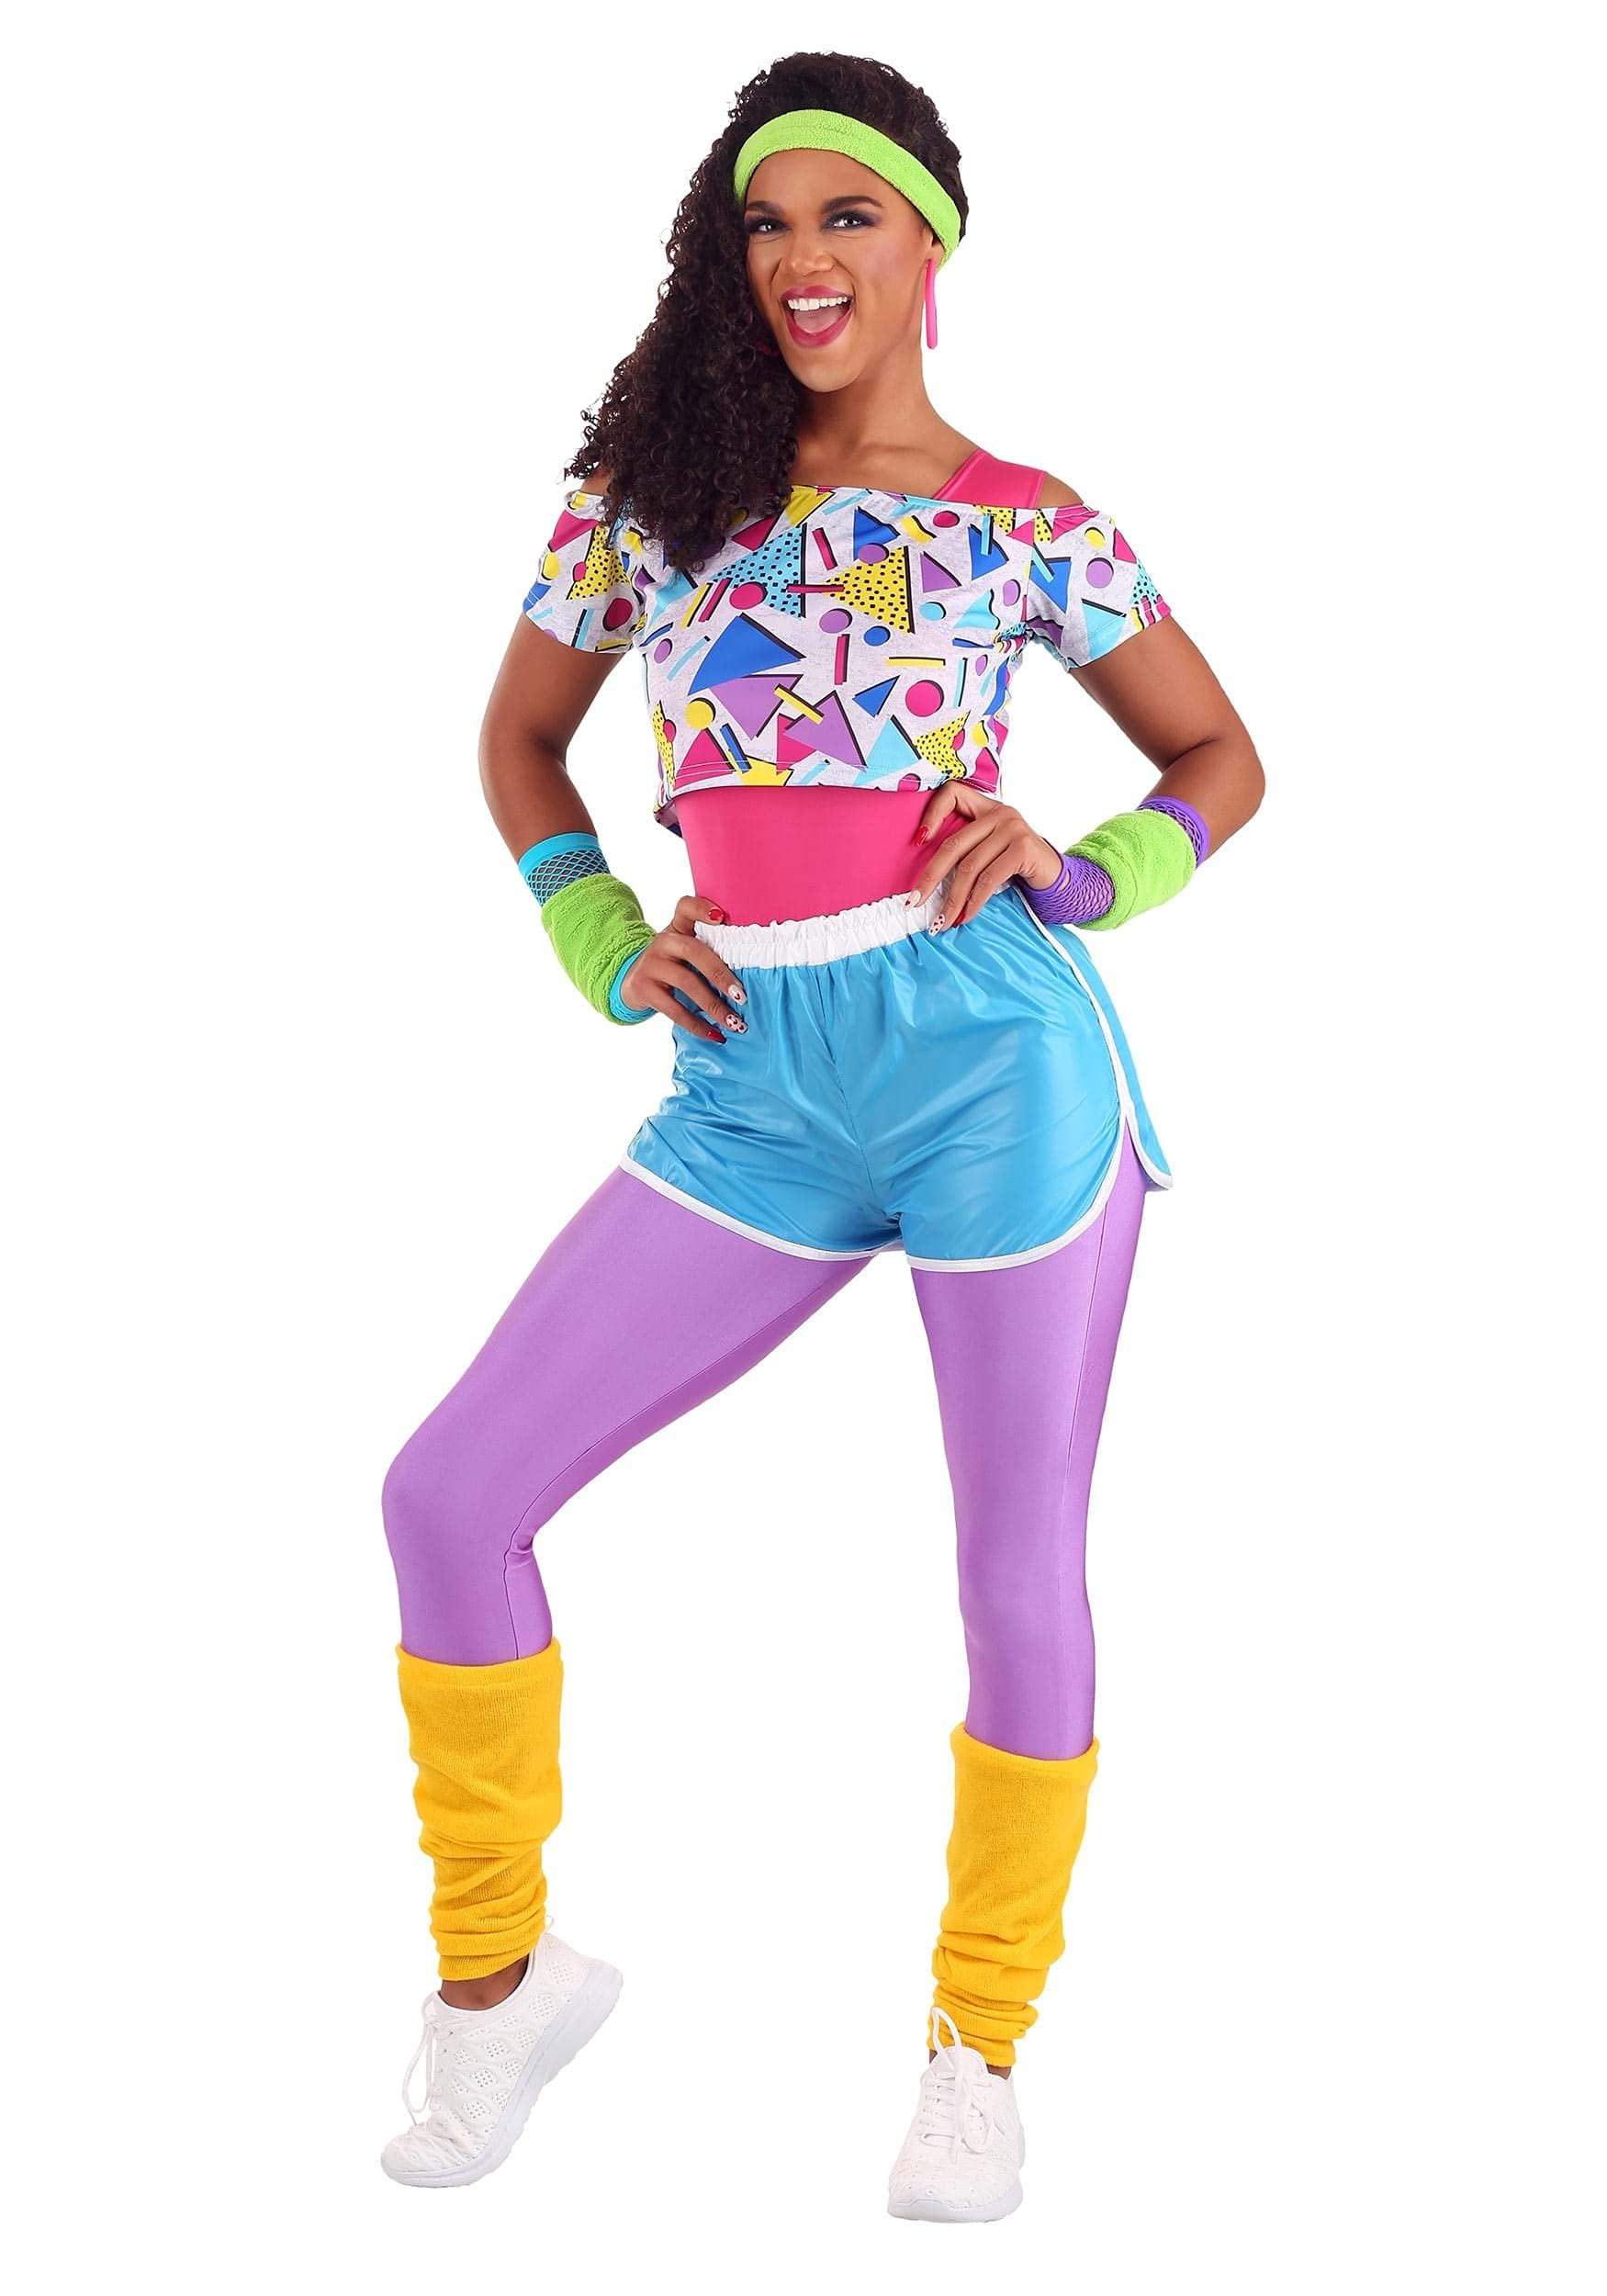 45 Best '80s Halloween Costumes 2023 - DIY '80s Outfits